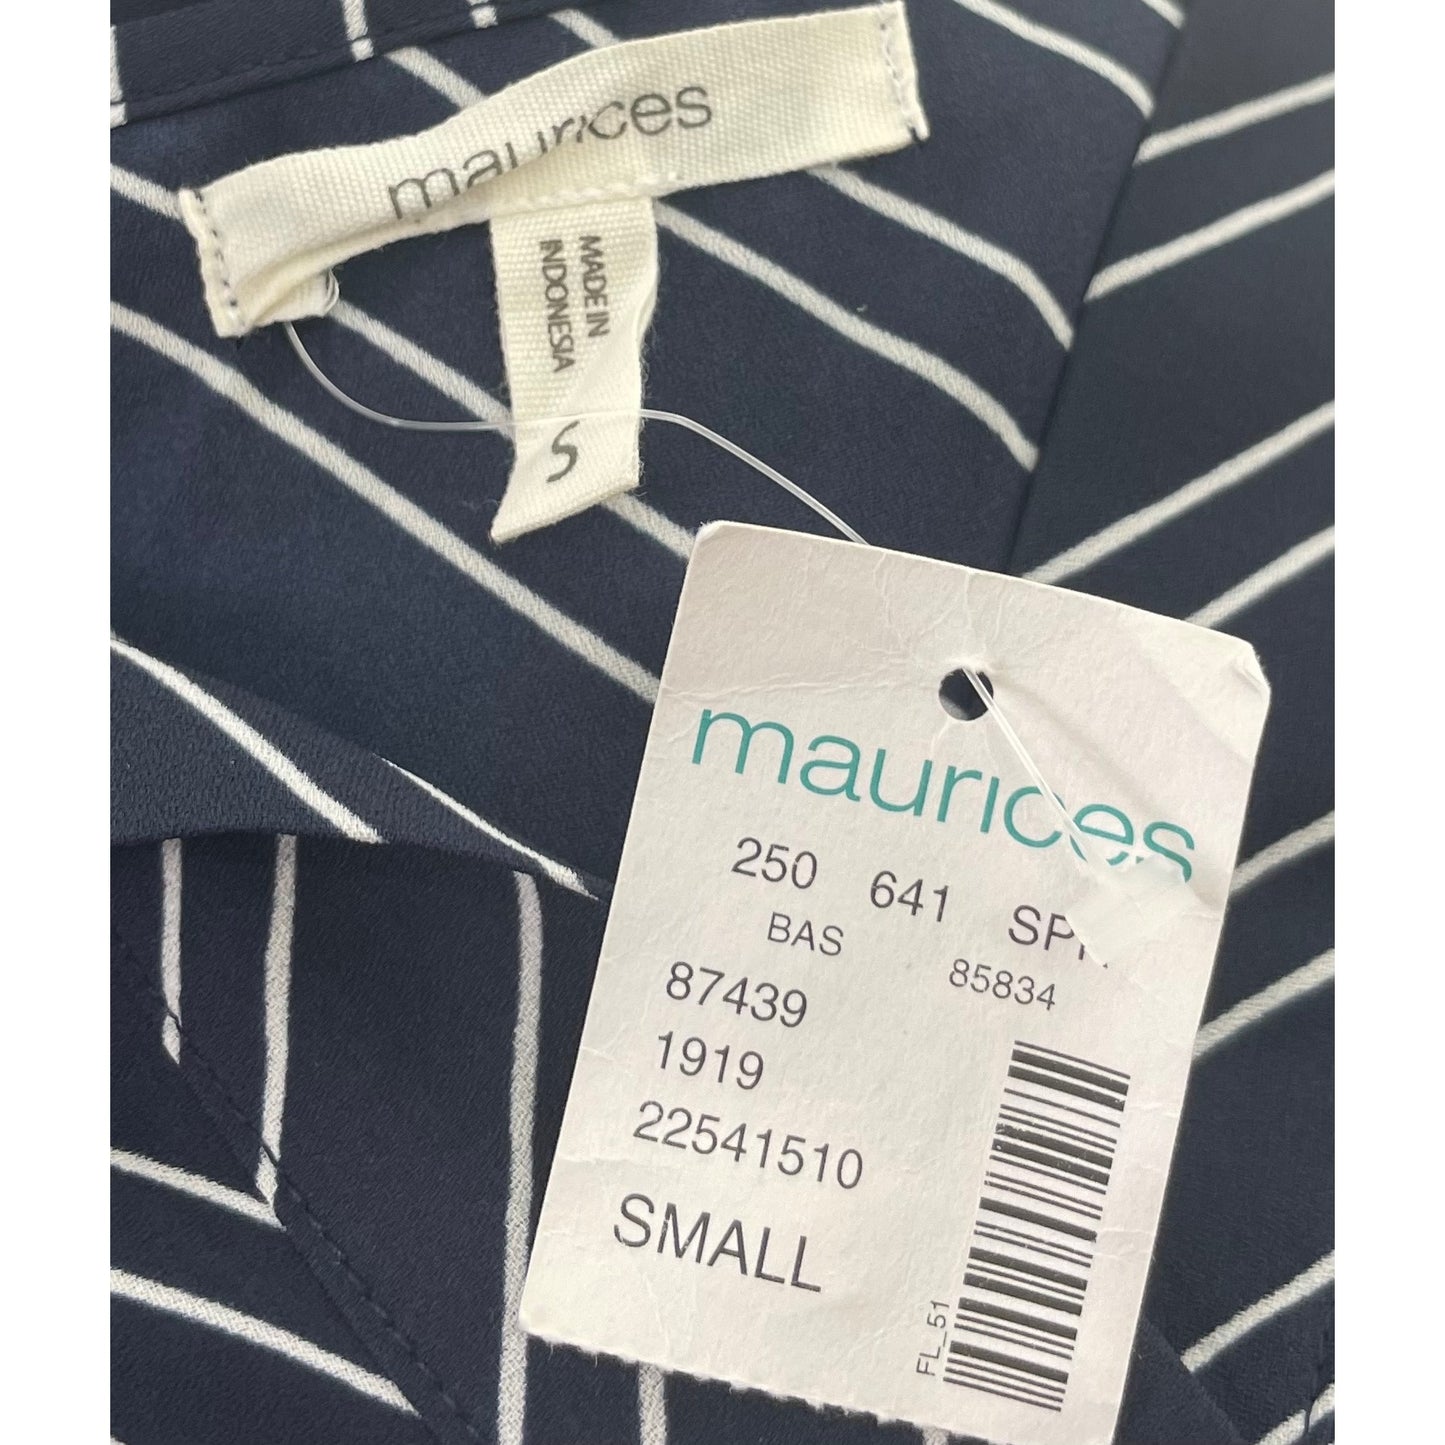 NWT Maurices Women's Size Small Navy & White Striped Short-Sleeved V-Neck Top